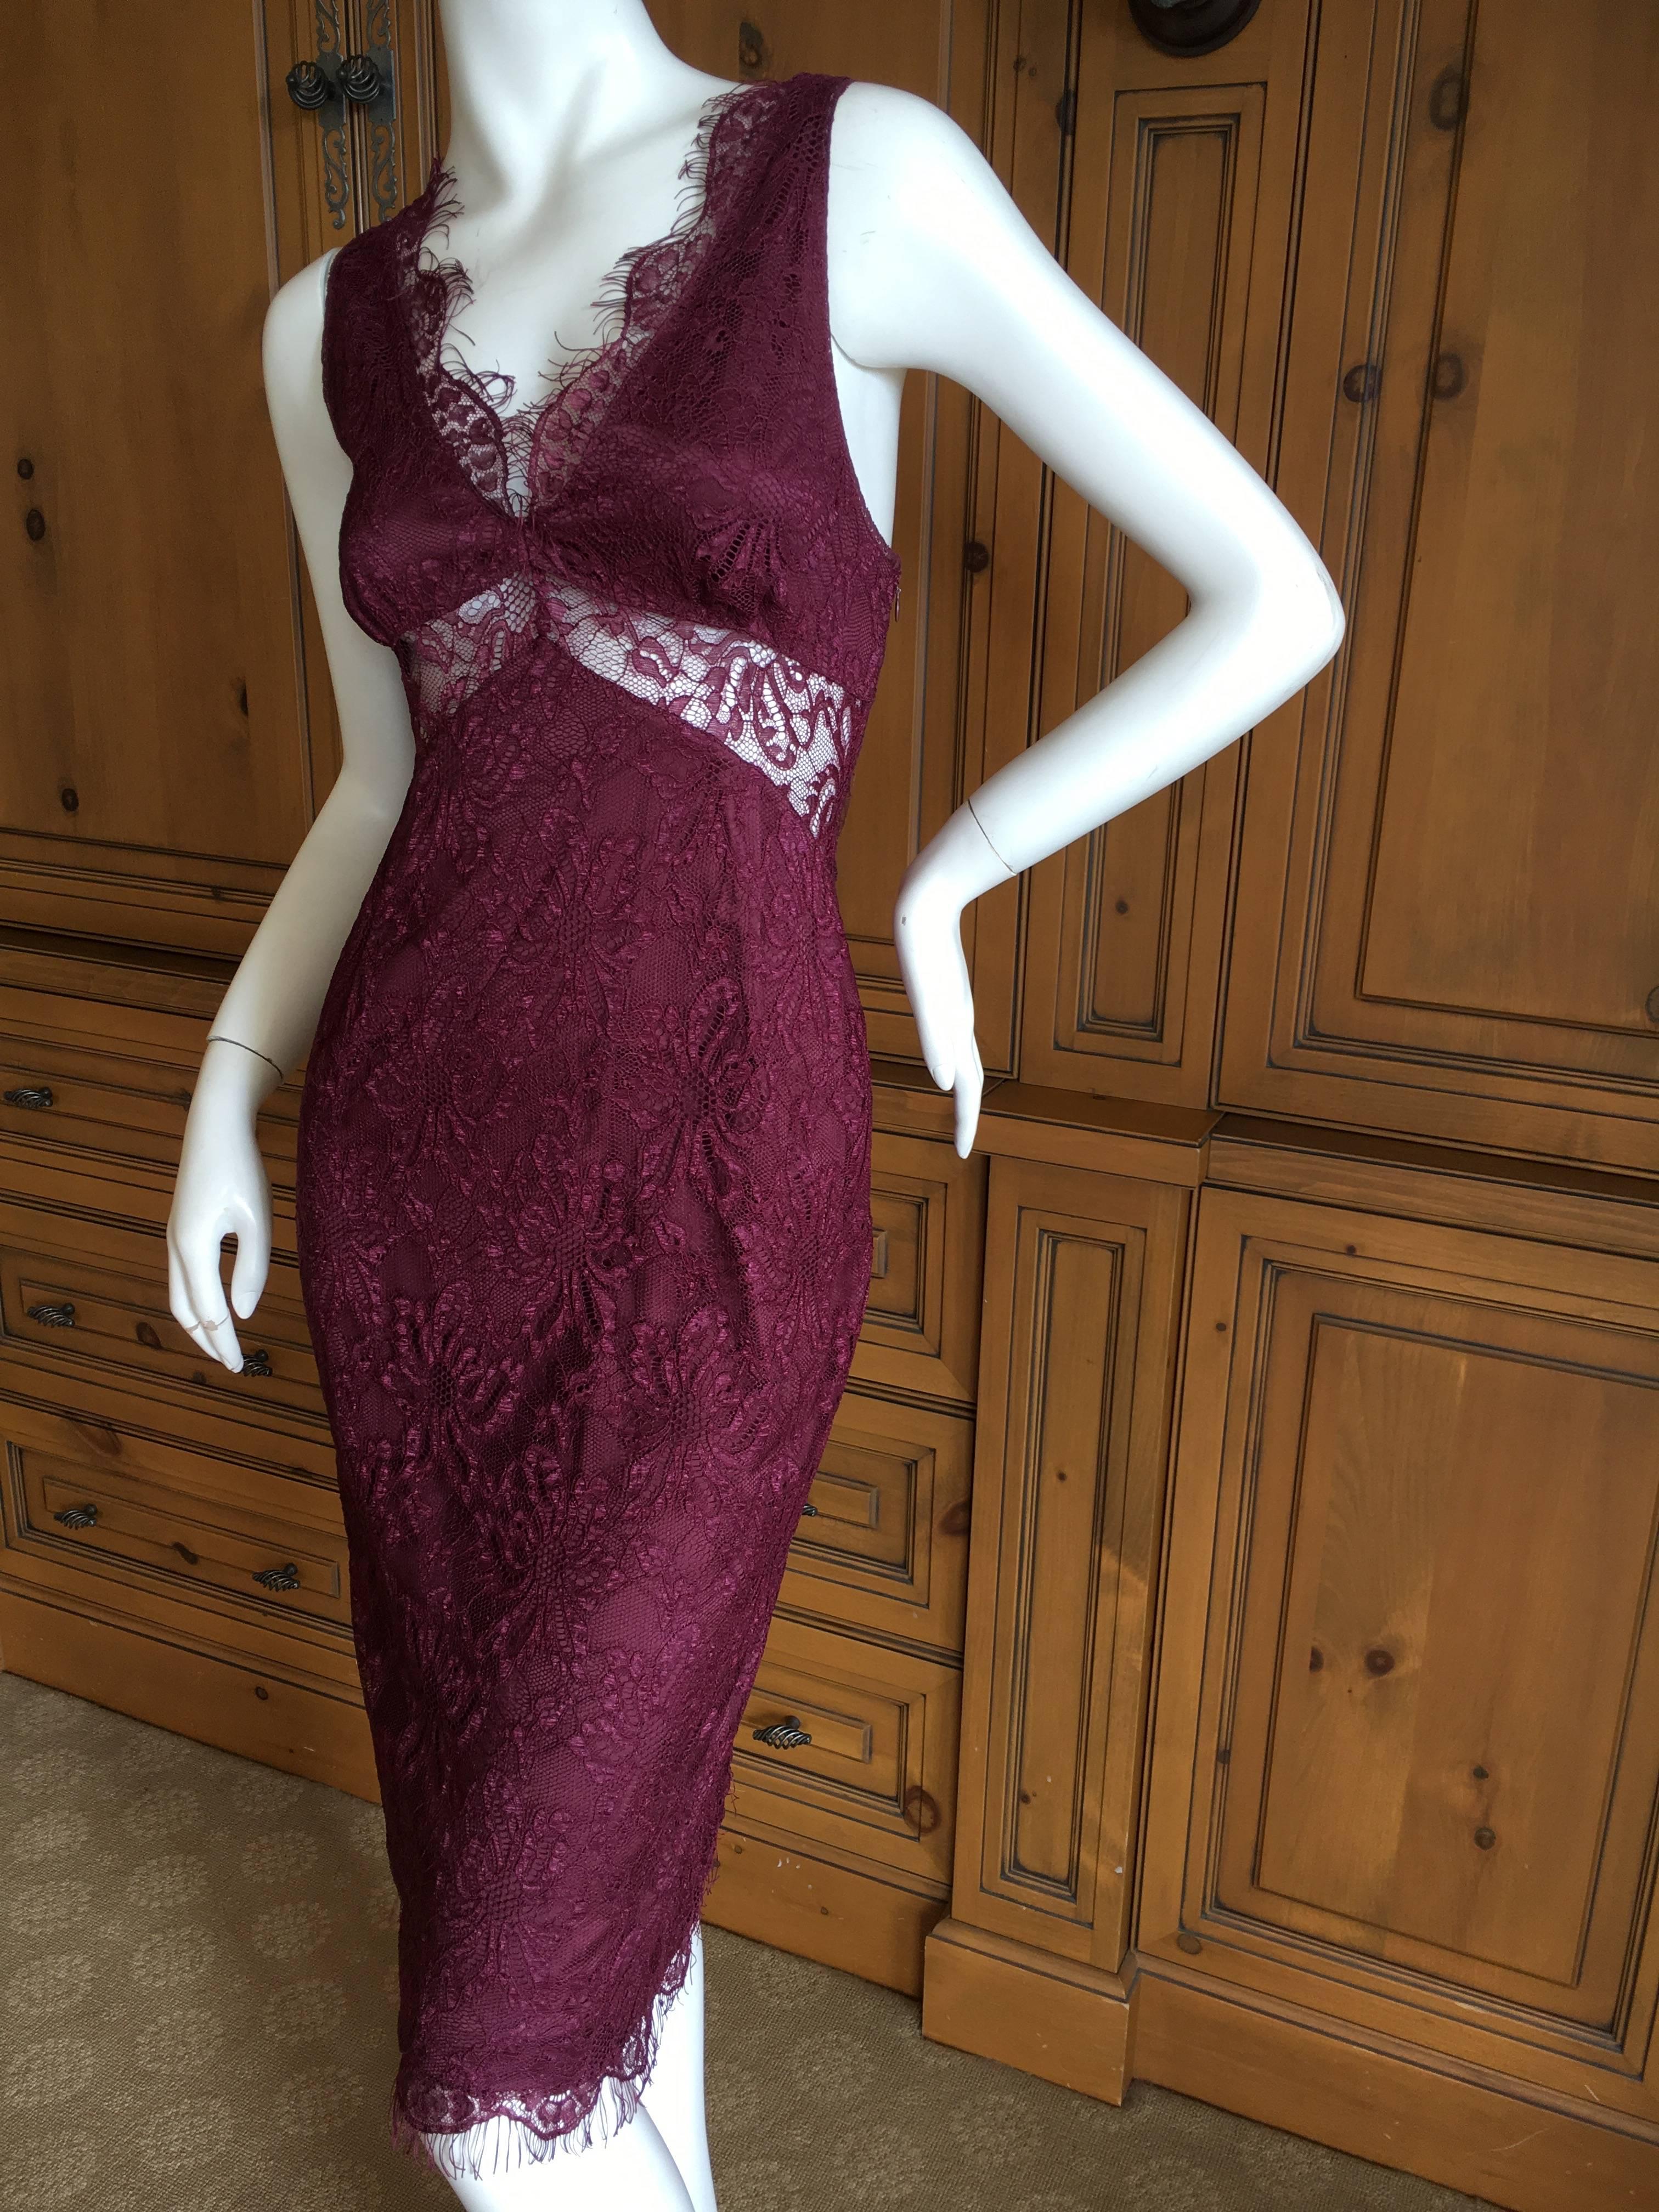  D&G Dolce & Gabbana Vintage Lace Overlay Sheer Cocktail Dress.
This is so pretty, with a sheer lace back.
Size 42
Bust 39"
Waist 28"
Hips 40"
Length 44"
Excellent condition